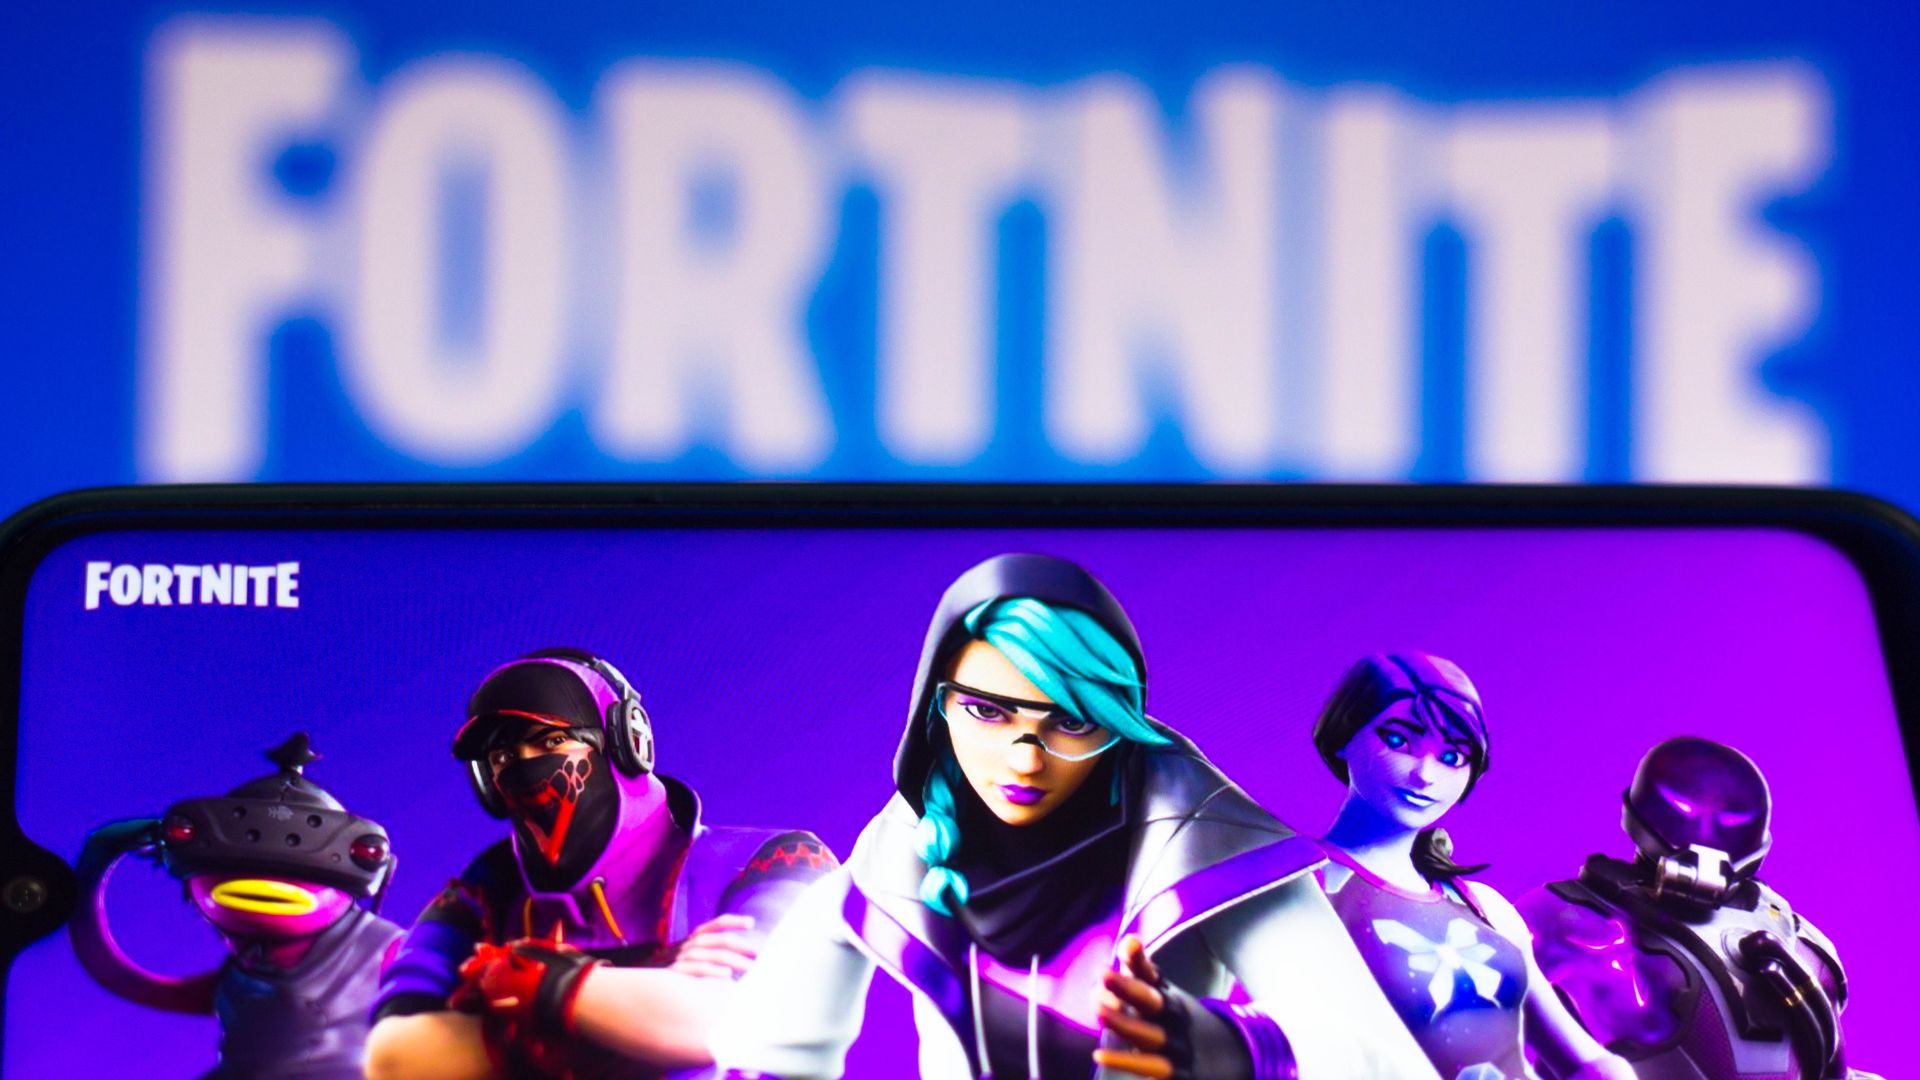 Epic asks Apple to allow "Fortnite" to return in South Korea